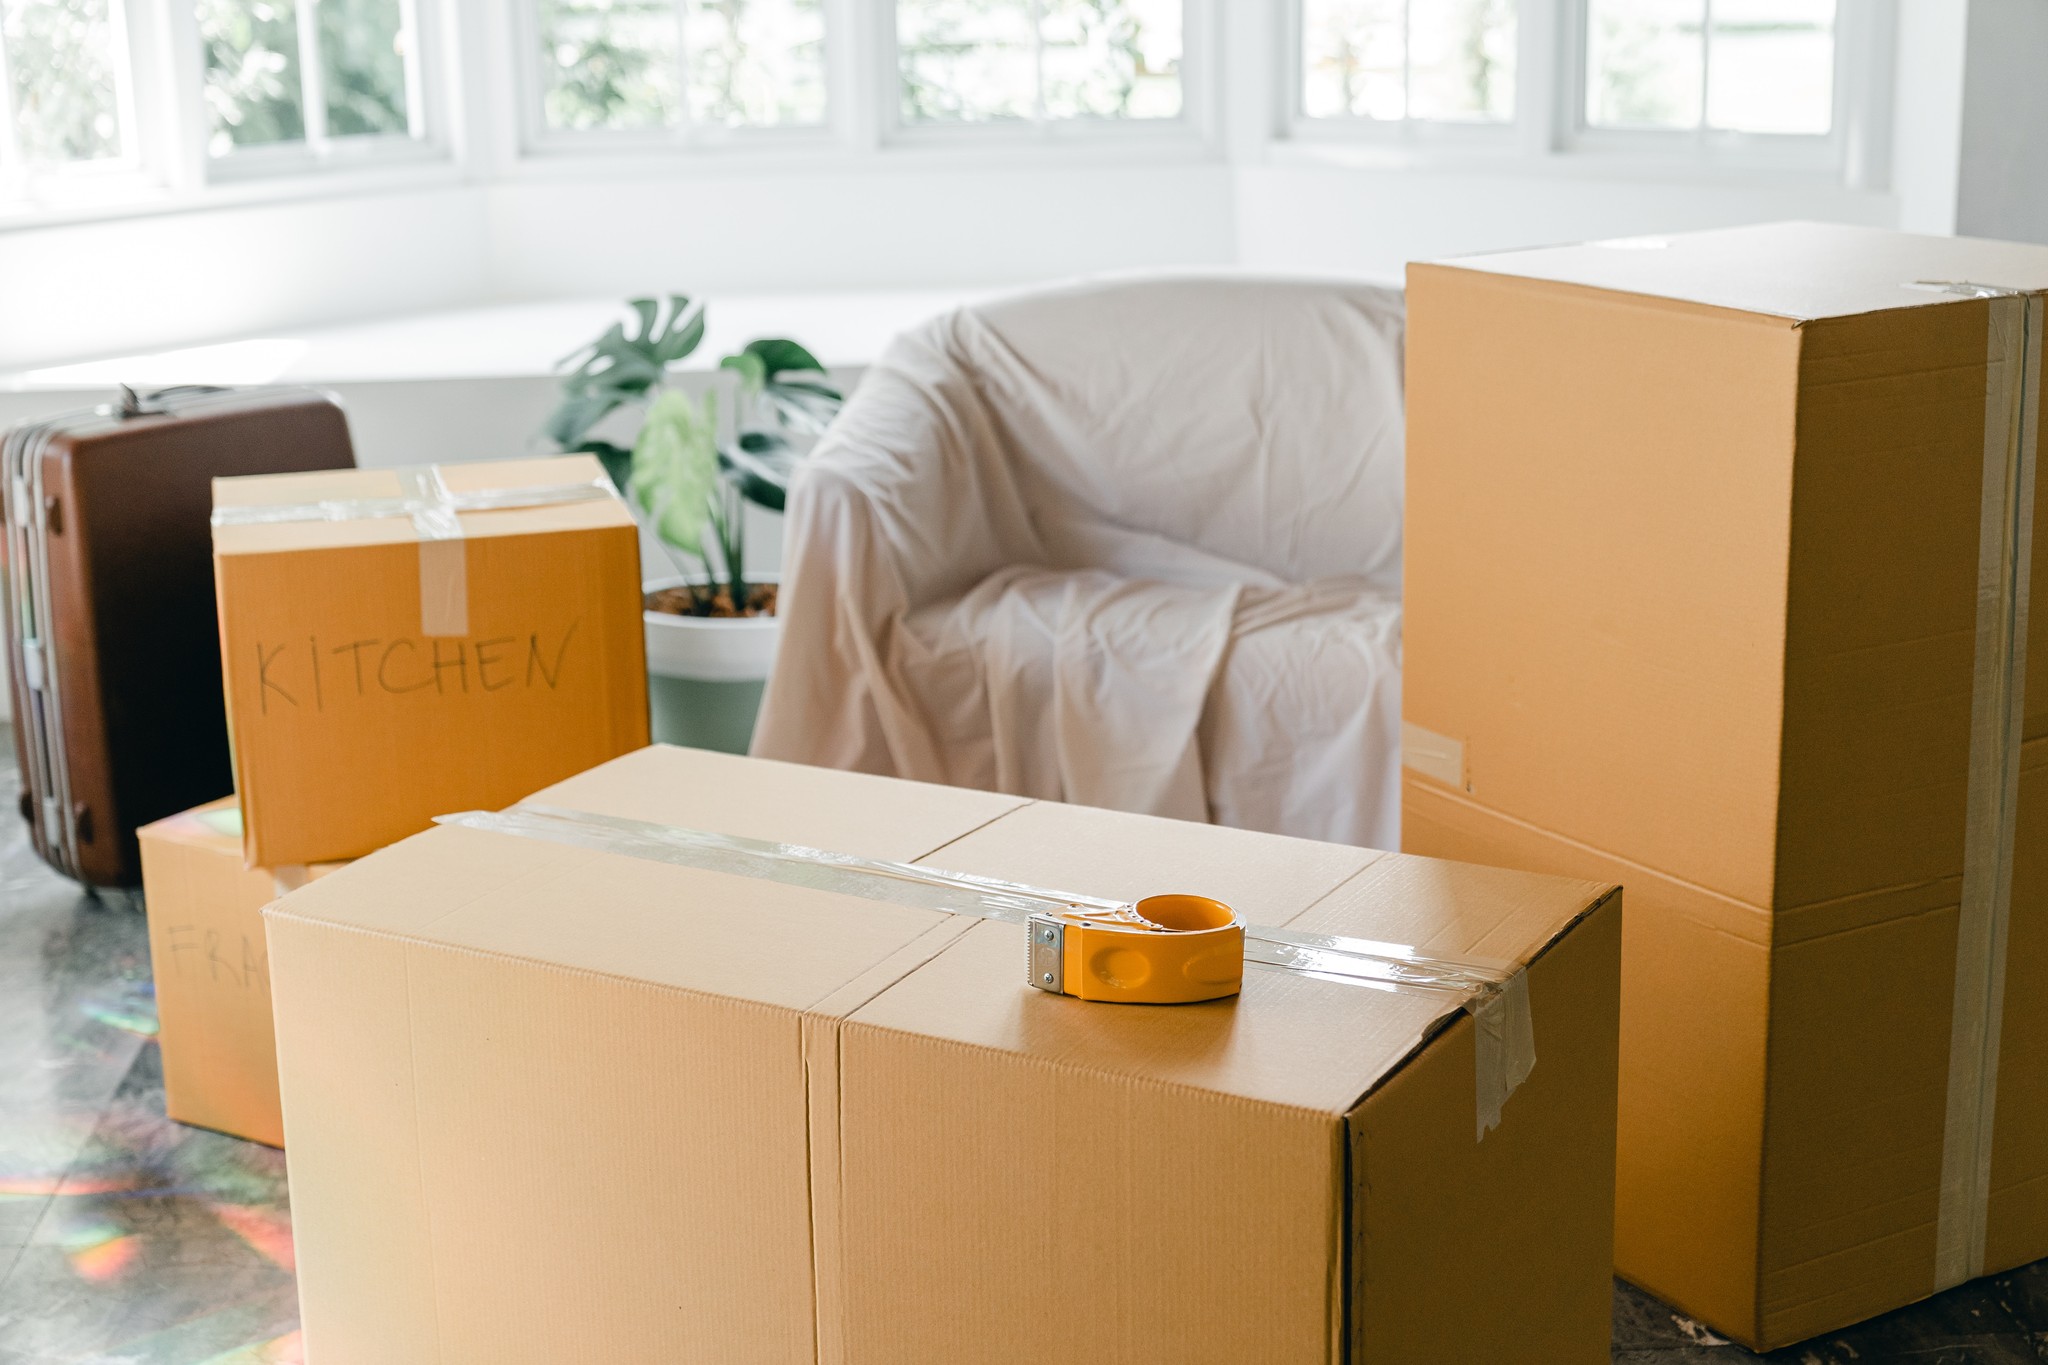 Moving Boxes and Covered Furniture in a bright room